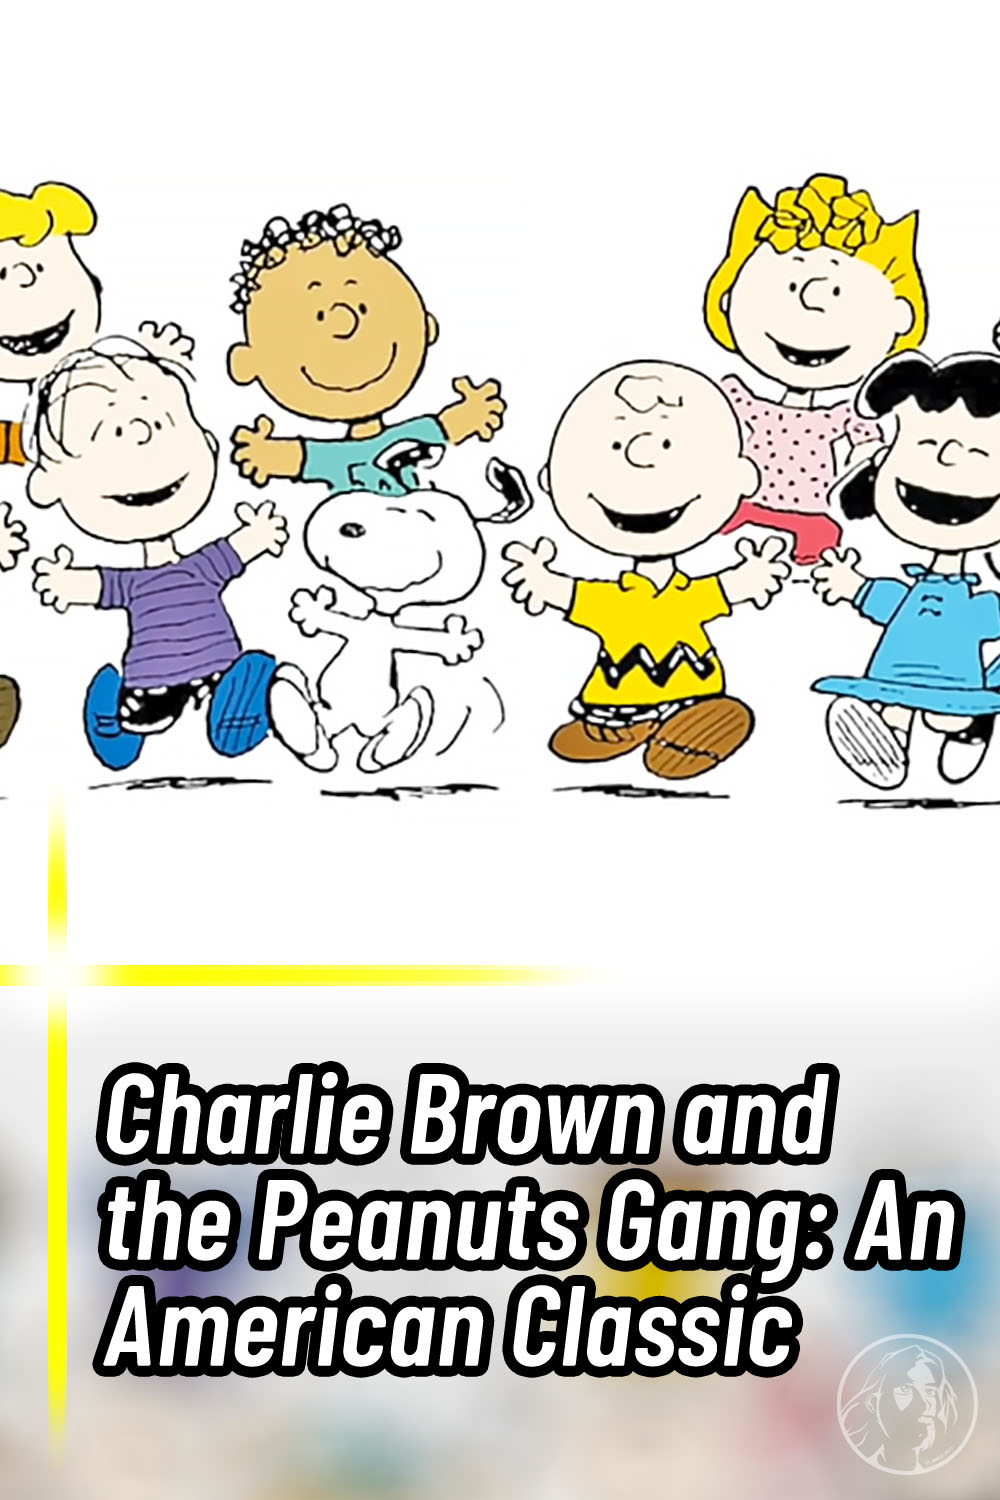 Charlie Brown and the Peanuts Gang: An American Classic